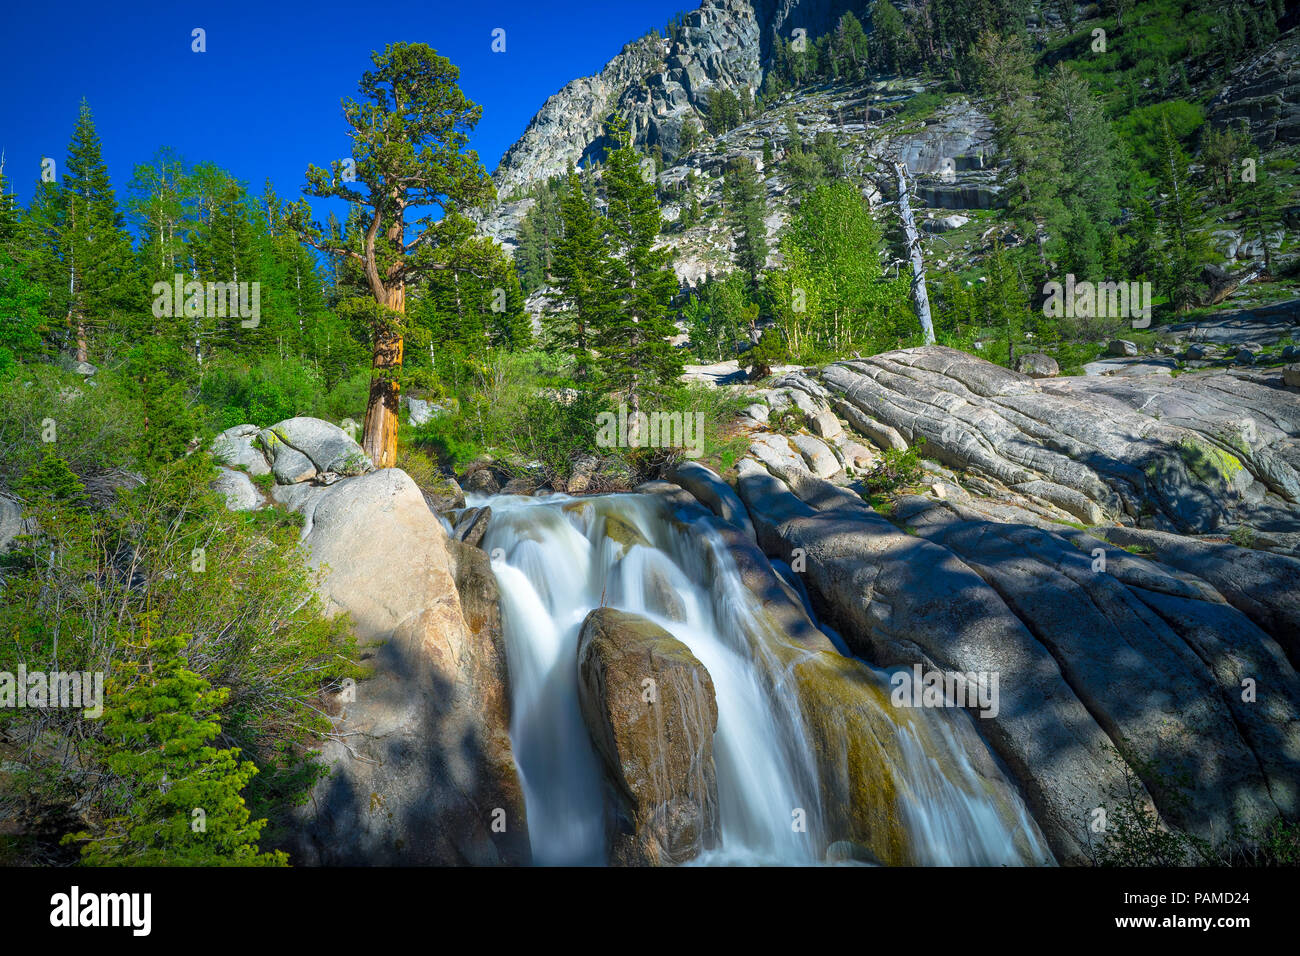 Stunning high Sierra forest landscape with smooth flowing falls - Highway 108 Roadside Stock Photo